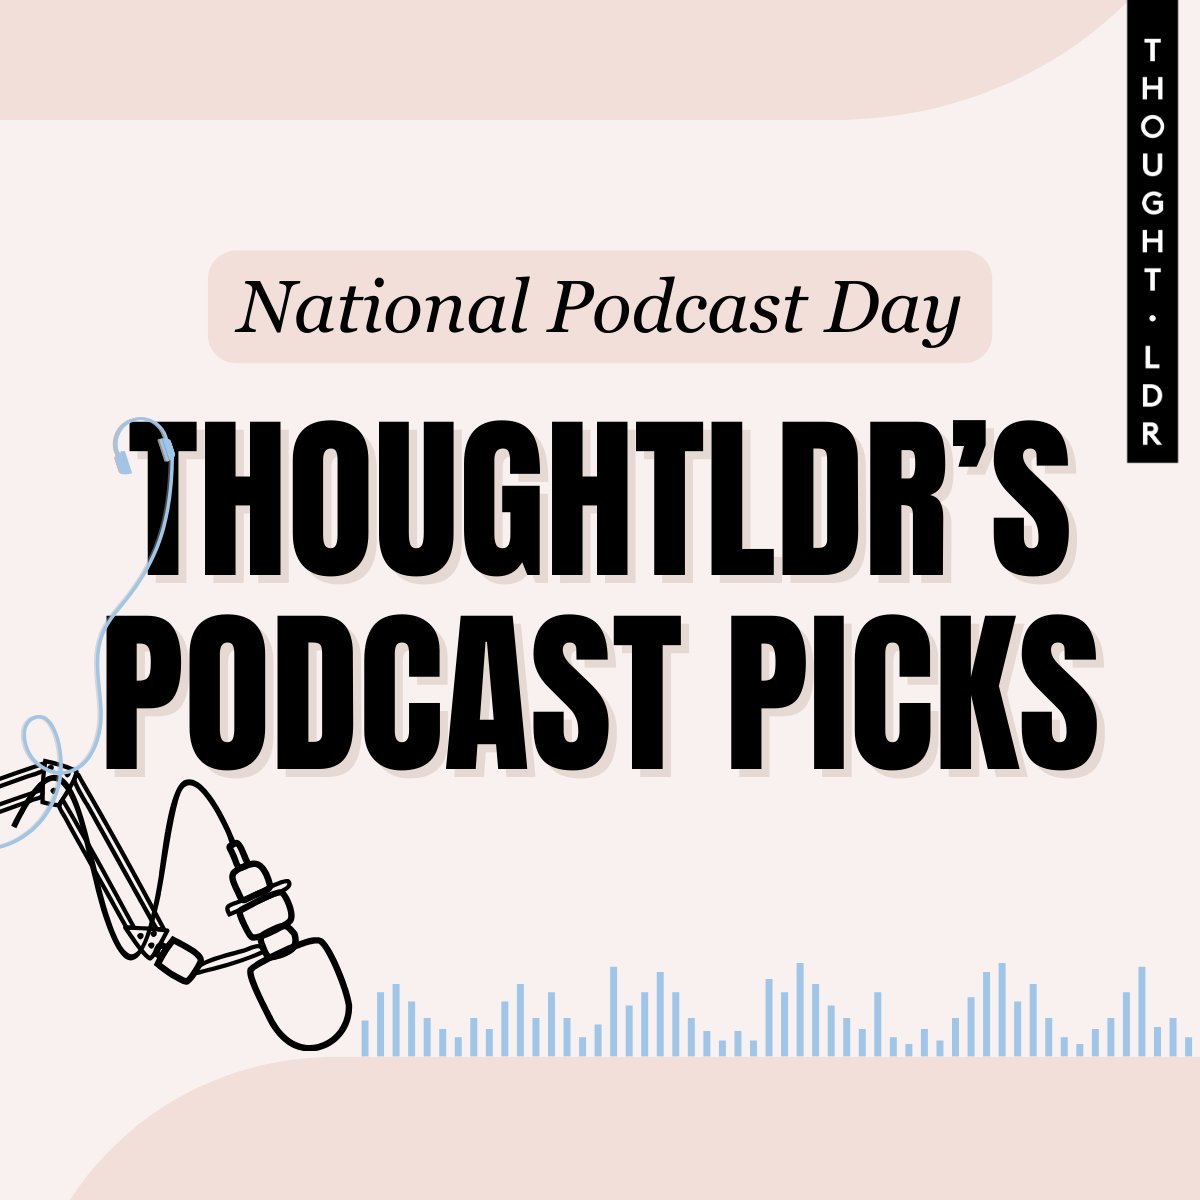 In honour of #NationalPodcastDay, we asked our team to share their current podcast picks to stay on top of the tech mix or to help wind down, and as expected, they didn’t disappoint. From The @FintechInsiders financial wisdom to stellar founder stories in Manifest Space we’ve…